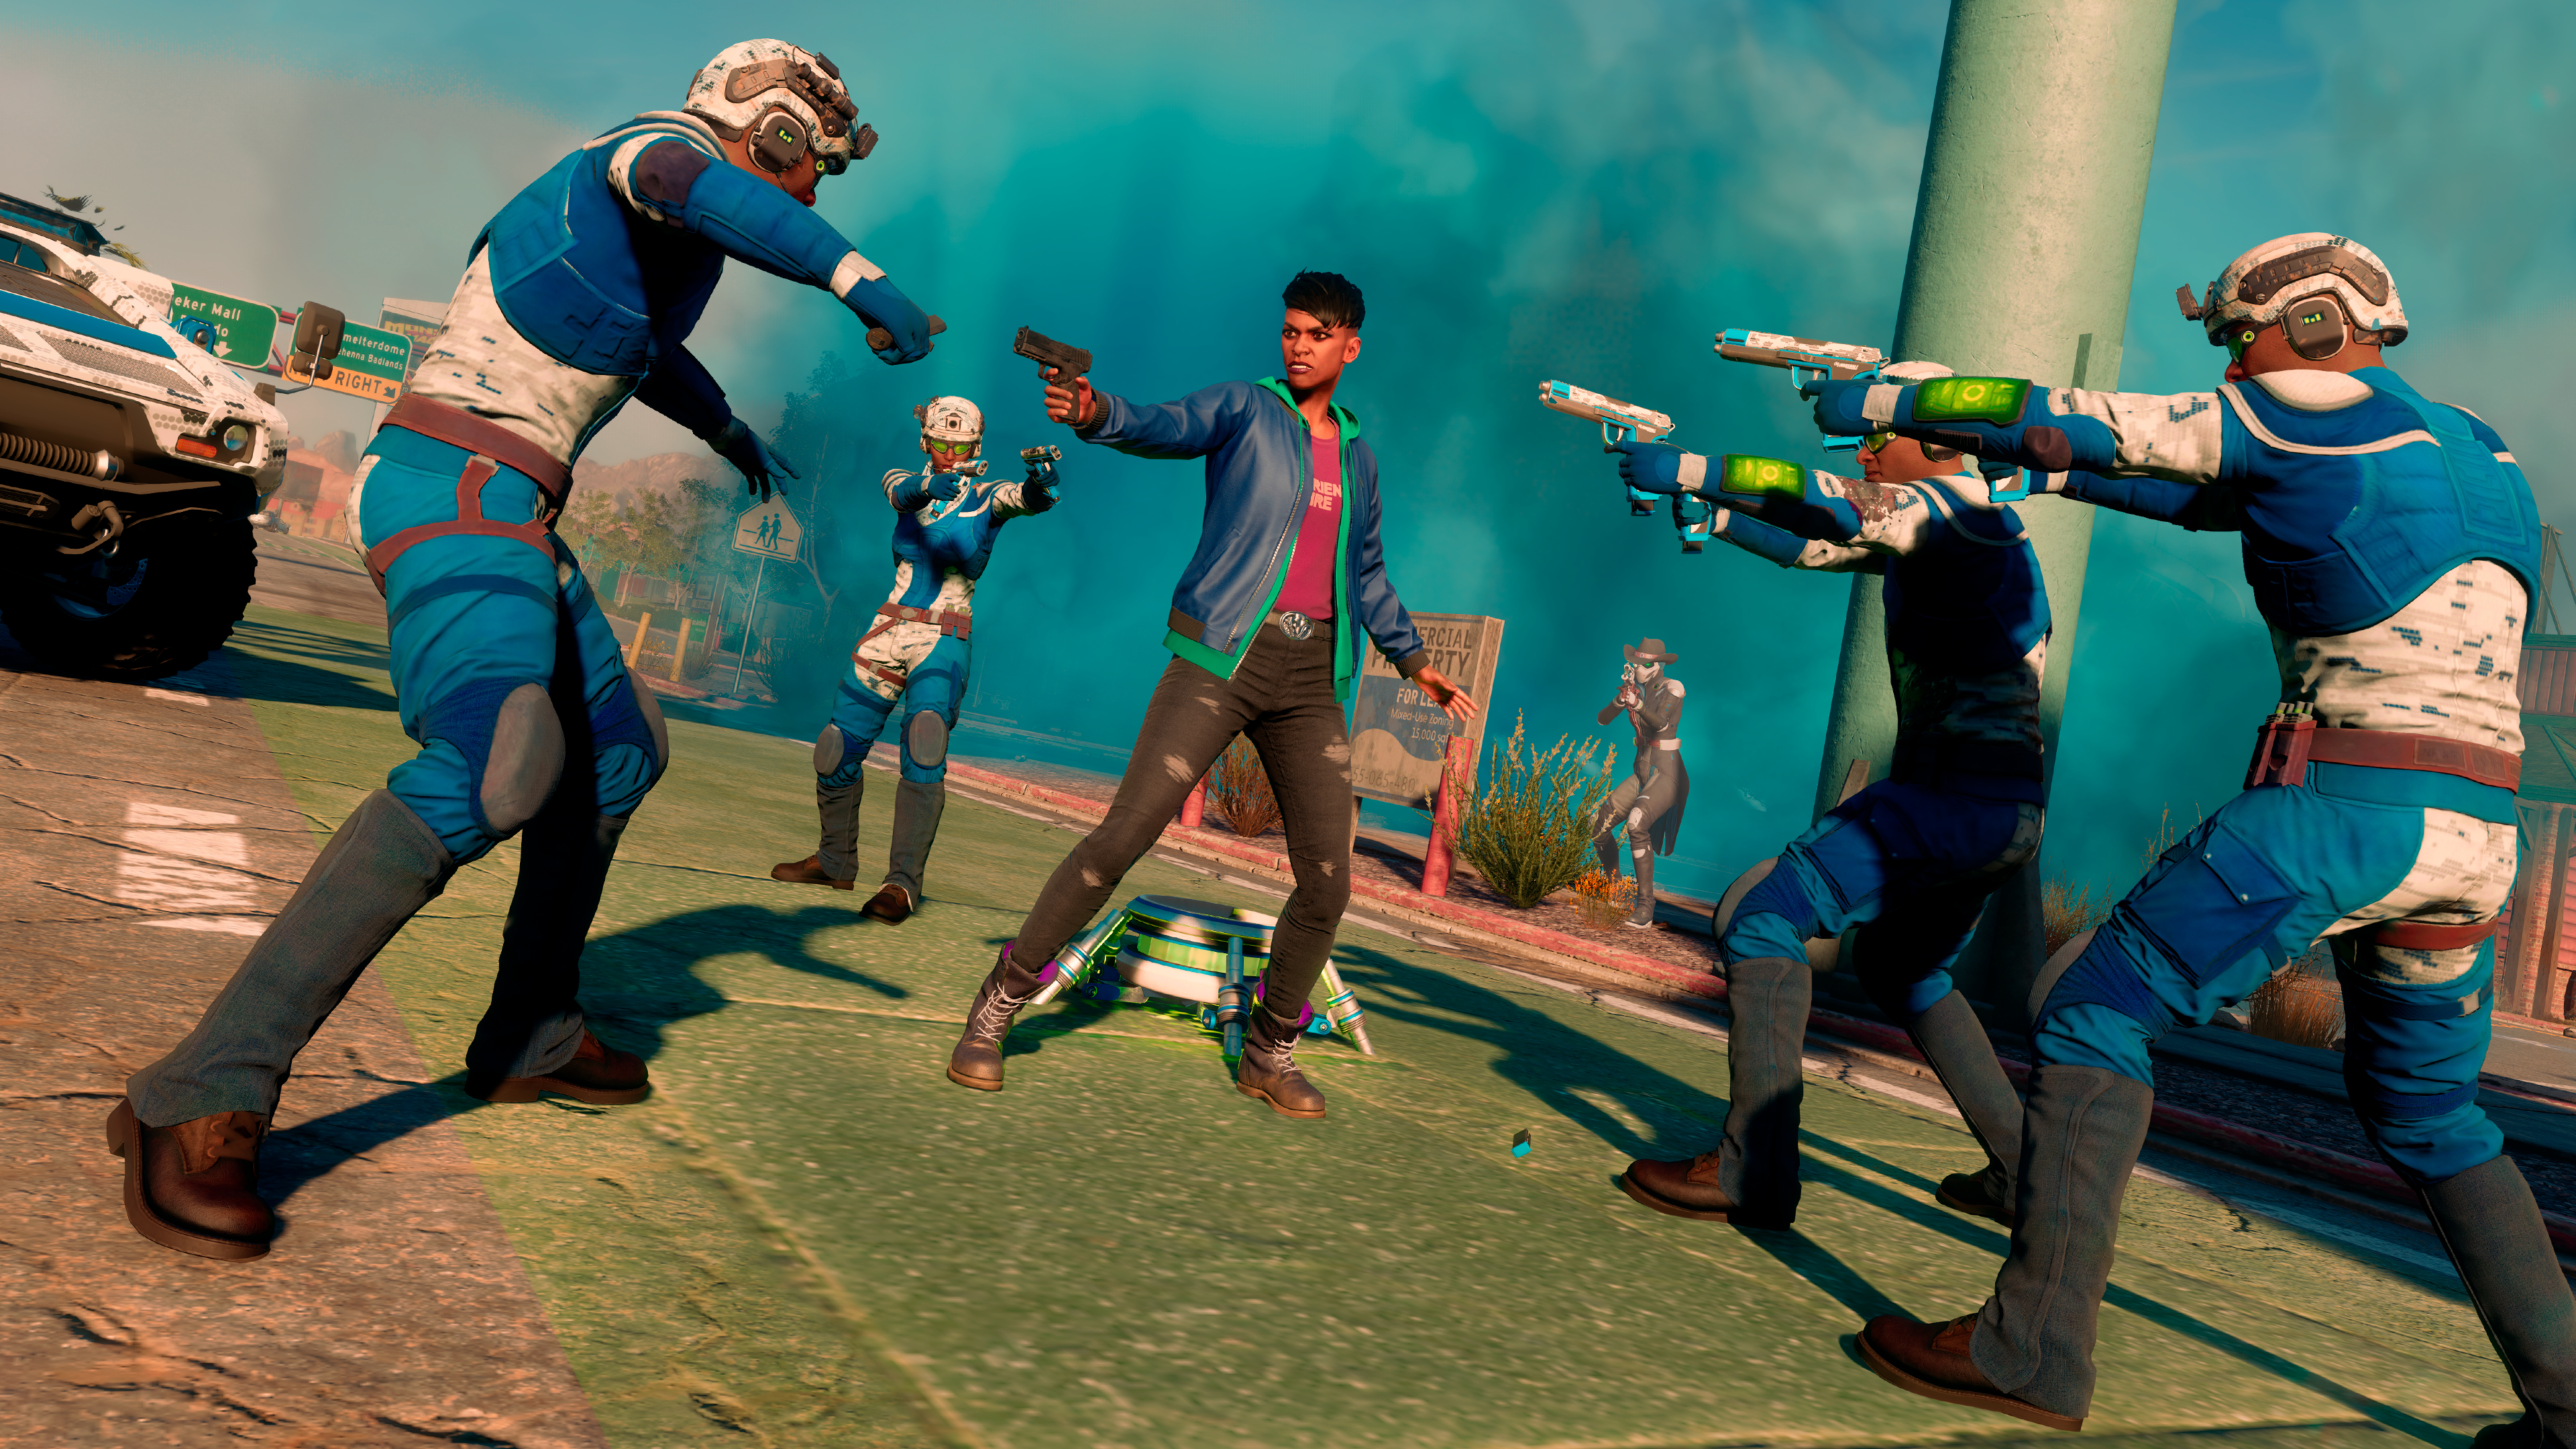 Saints Row reboot starts the series from scratch - CNET